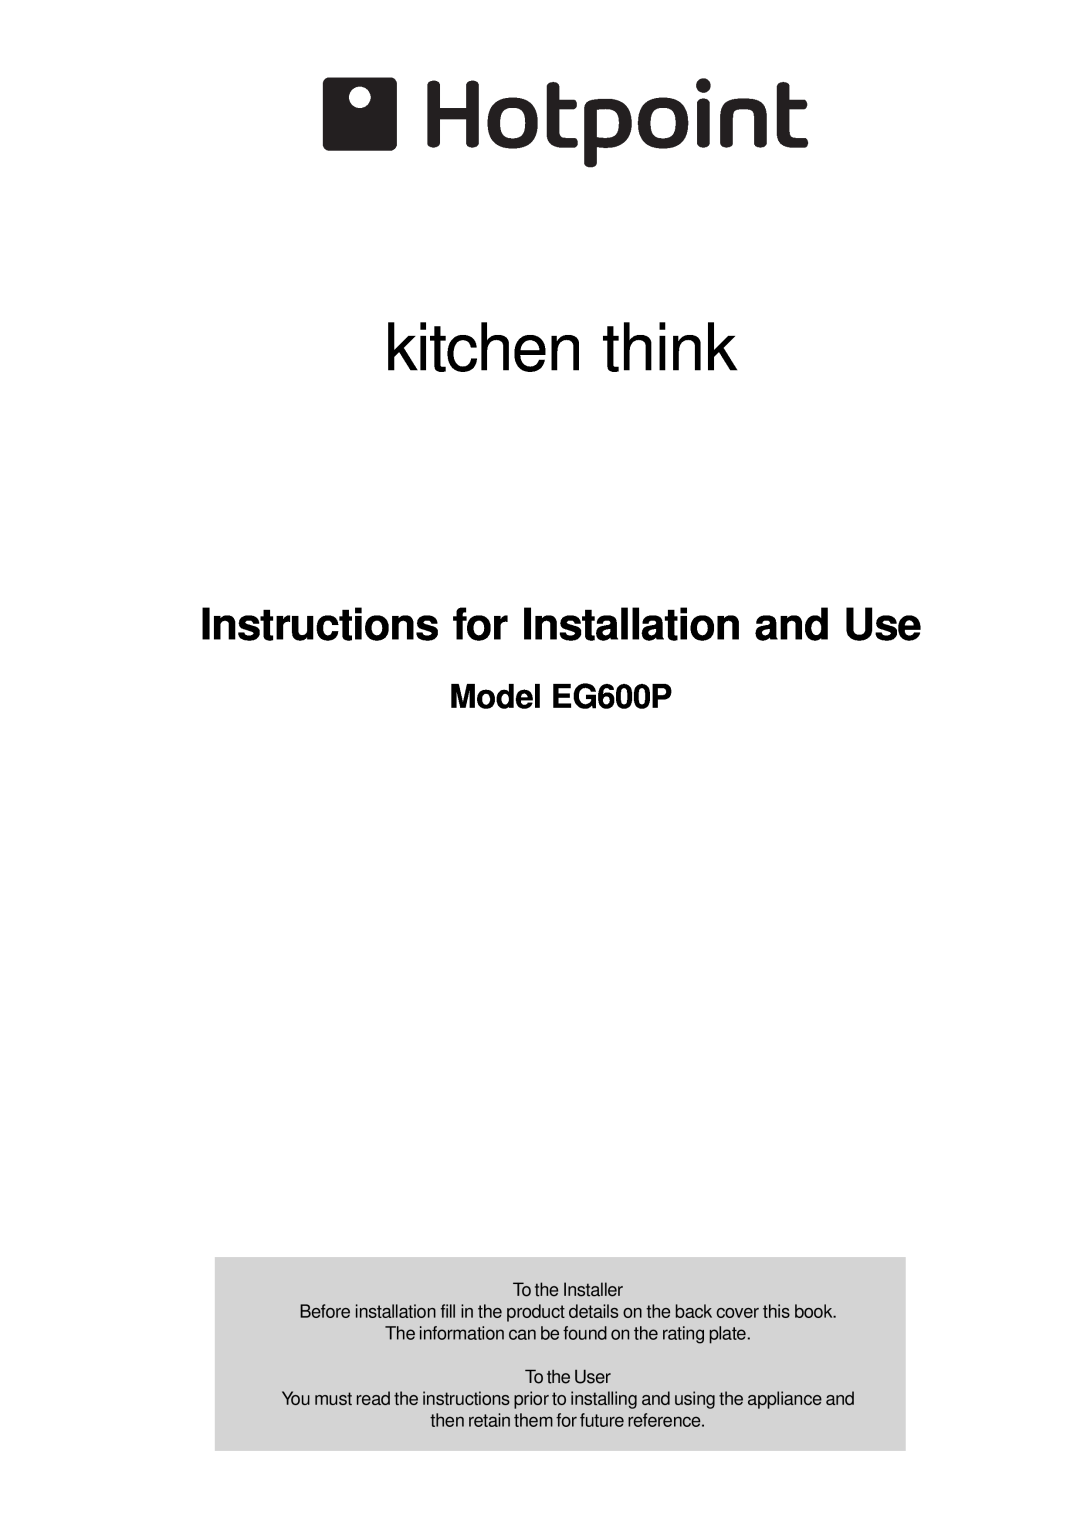 Hotpoint manual Model EG600P, kitchen think, Instructions for Installation and Use 